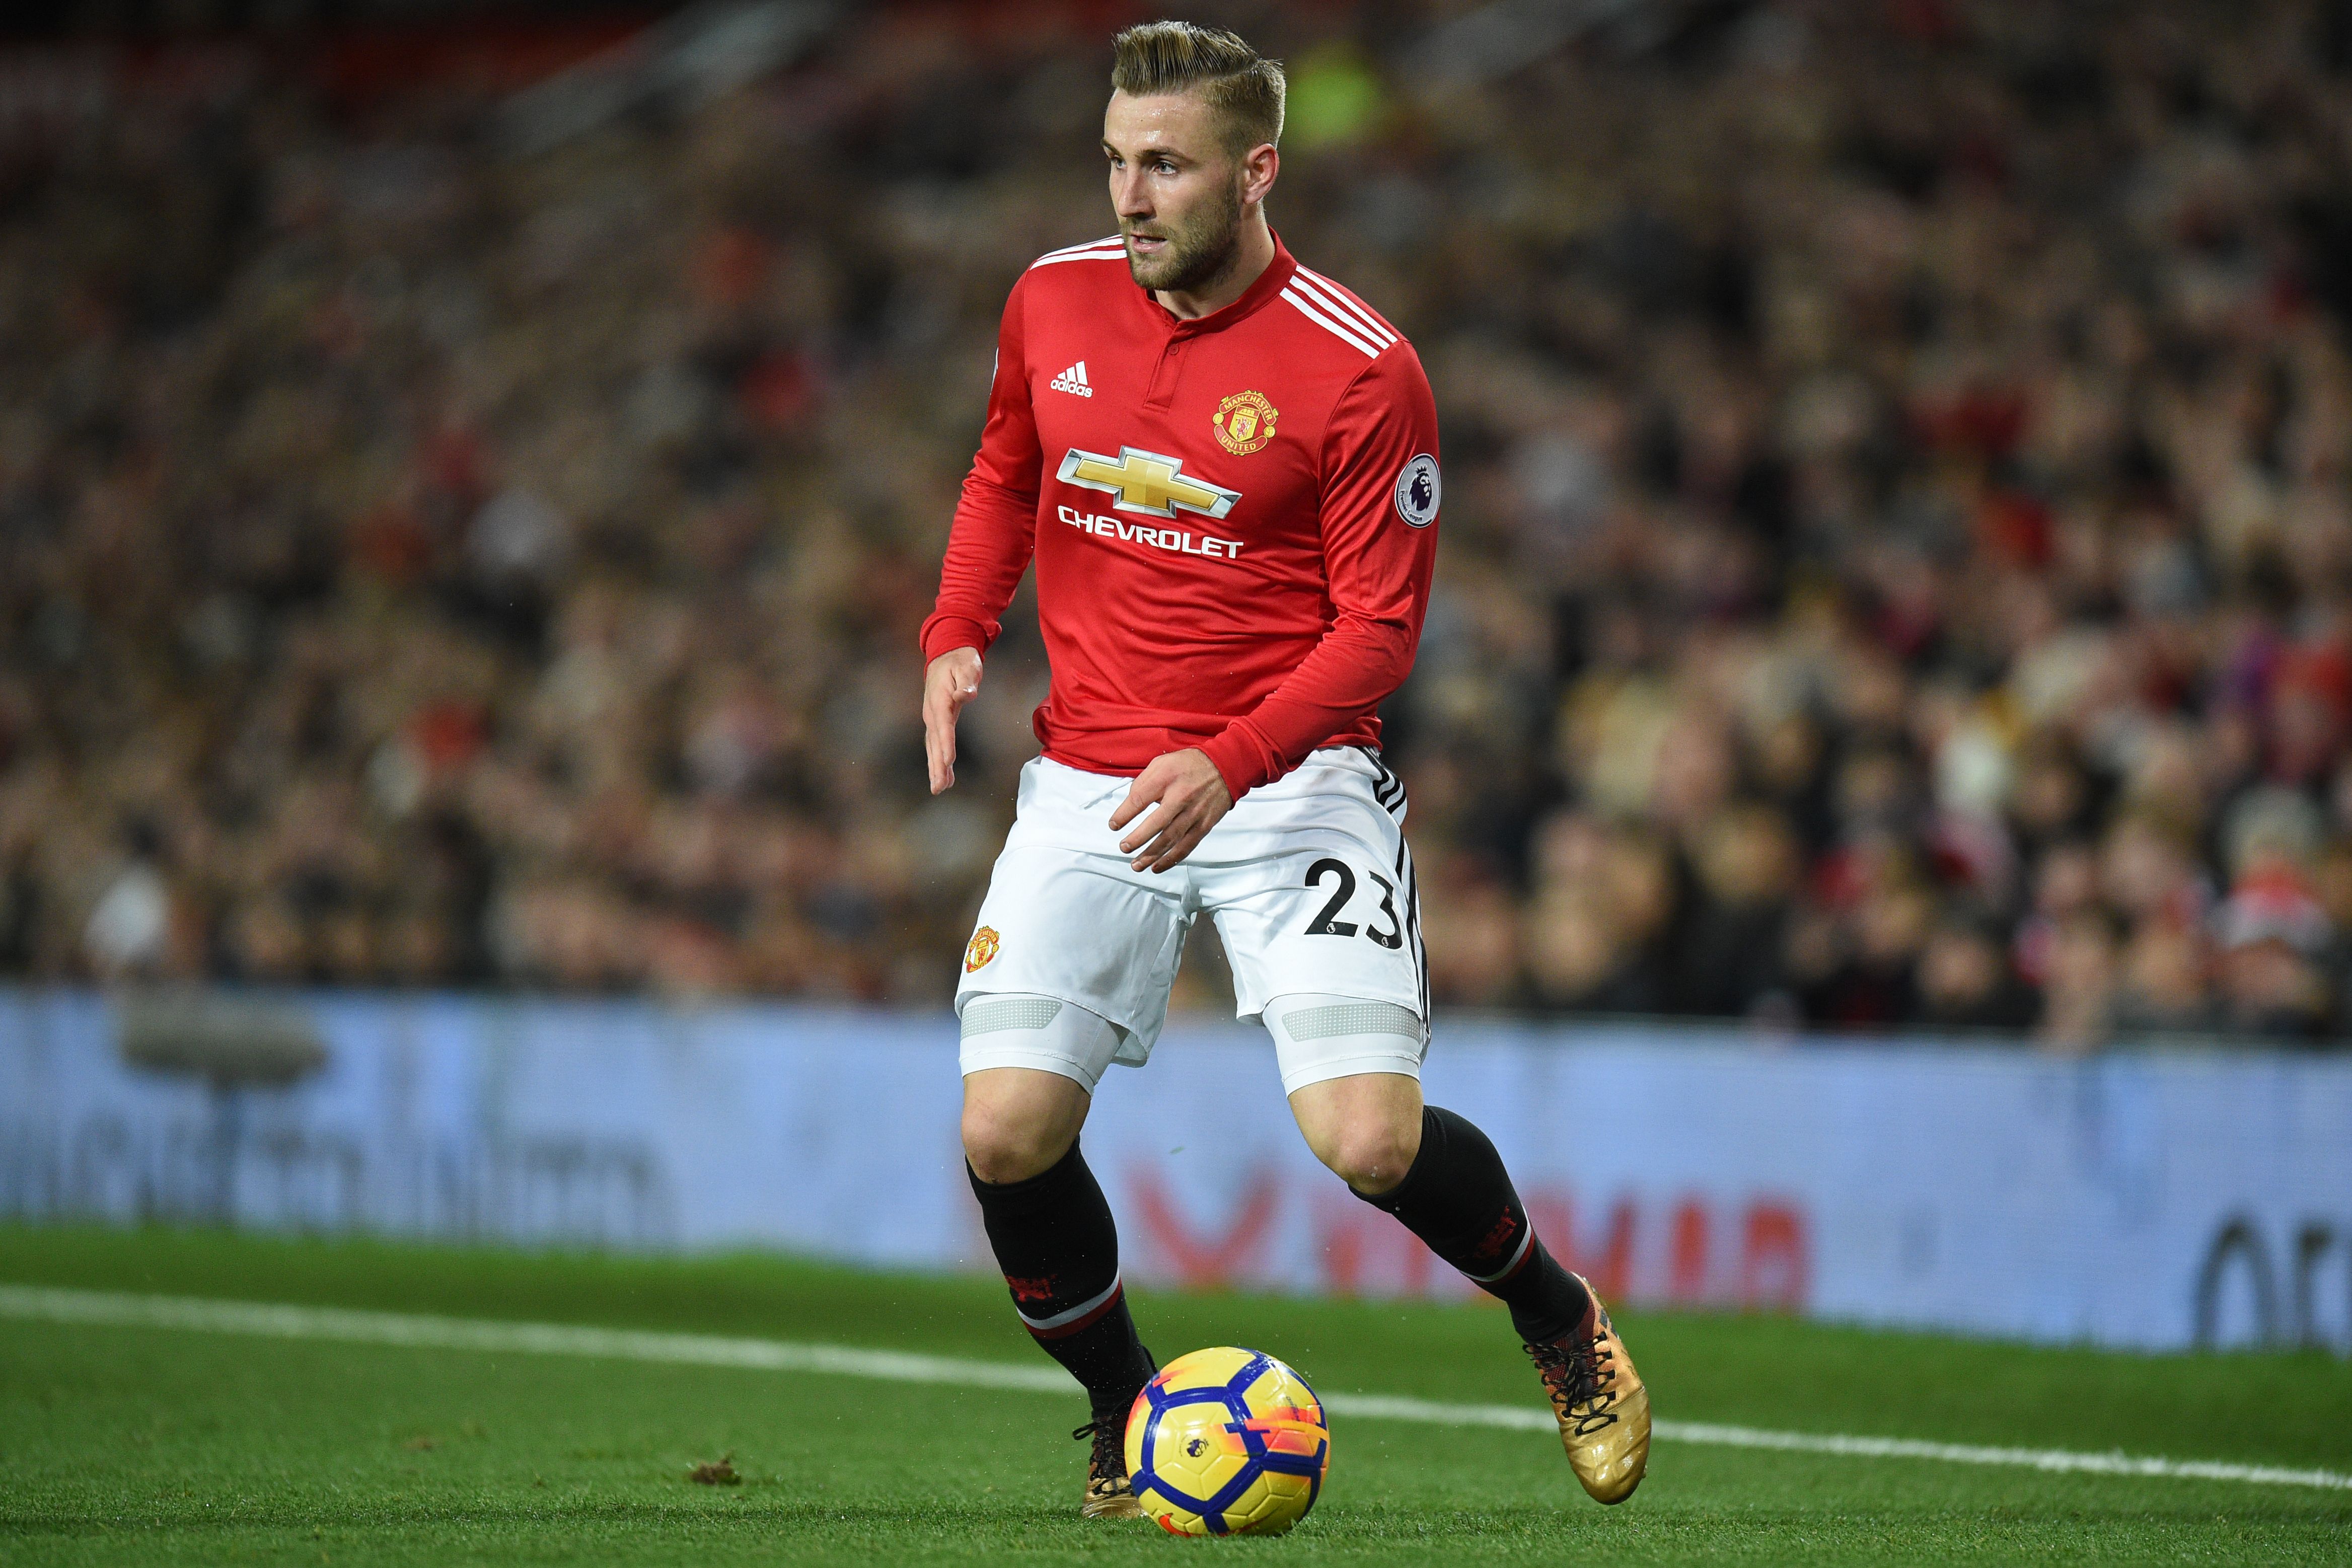 Manchester United's English defender Luke Shaw prepares to pass the ball during the English Premier League football match between Manchester United and Southampton at Old Trafford in Manchester, north west England, on December 30, 2017. / AFP PHOTO / Oli SCARFF / RESTRICTED TO EDITORIAL USE. No use with unauthorized audio, video, data, fixture lists, club/league logos or 'live' services. Online in-match use limited to 75 images, no video emulation. No use in betting, games or single club/league/player publications.  /         (Photo credit should read OLI SCARFF/AFP/Getty Images)